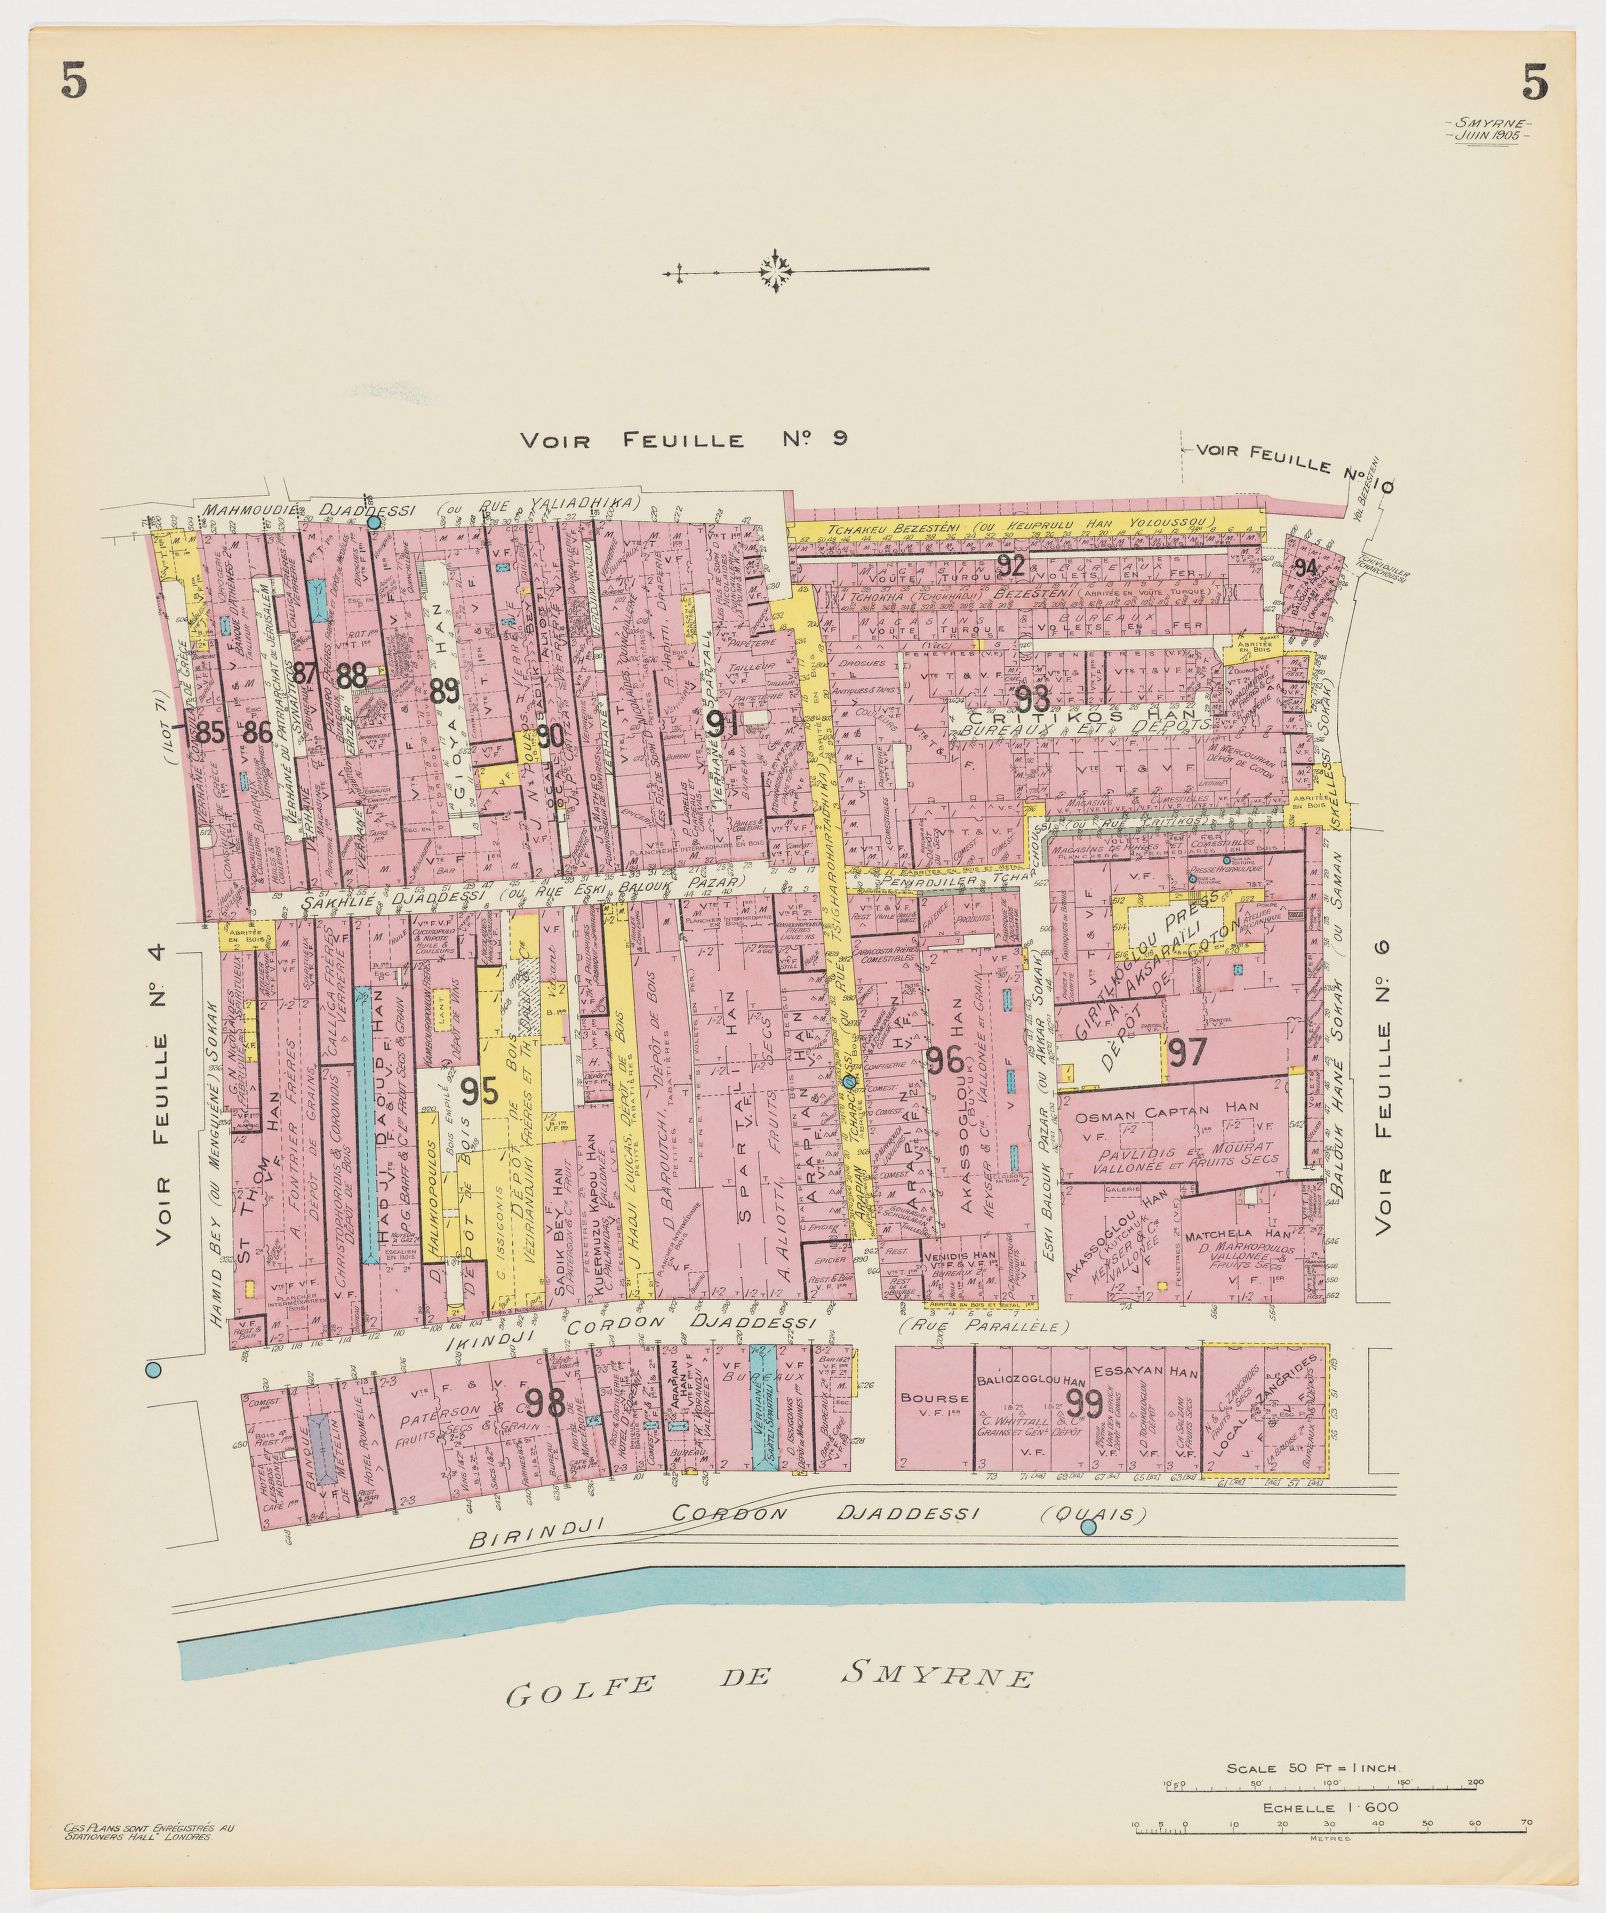 Charles E. Goad - <span style="color: rgb(1, 1, 1); line-height: 16px;">A sheet from the&nbsp;</span><span style="color: rgb(1, 1, 1); font-style: italic; line-height: 16px;">Plan d'assurance de Smyrne (Smyrna)&nbsp;</span><span style="color: rgb(1, 1, 1); line-height: 16px;">(Insurance Plan of Smyrna)</span><span style="color: rgb(1, 1, 1); line-height: 16px;">. The complete set of plans is available on&nbsp;</span><a href="http://archnet.org/publications/10377" target="_blank" data-bypass="true" style="line-height: 16px;">Archnet</a><span style="color: rgb(1, 1, 1); line-height: 16px;">.</span><br>